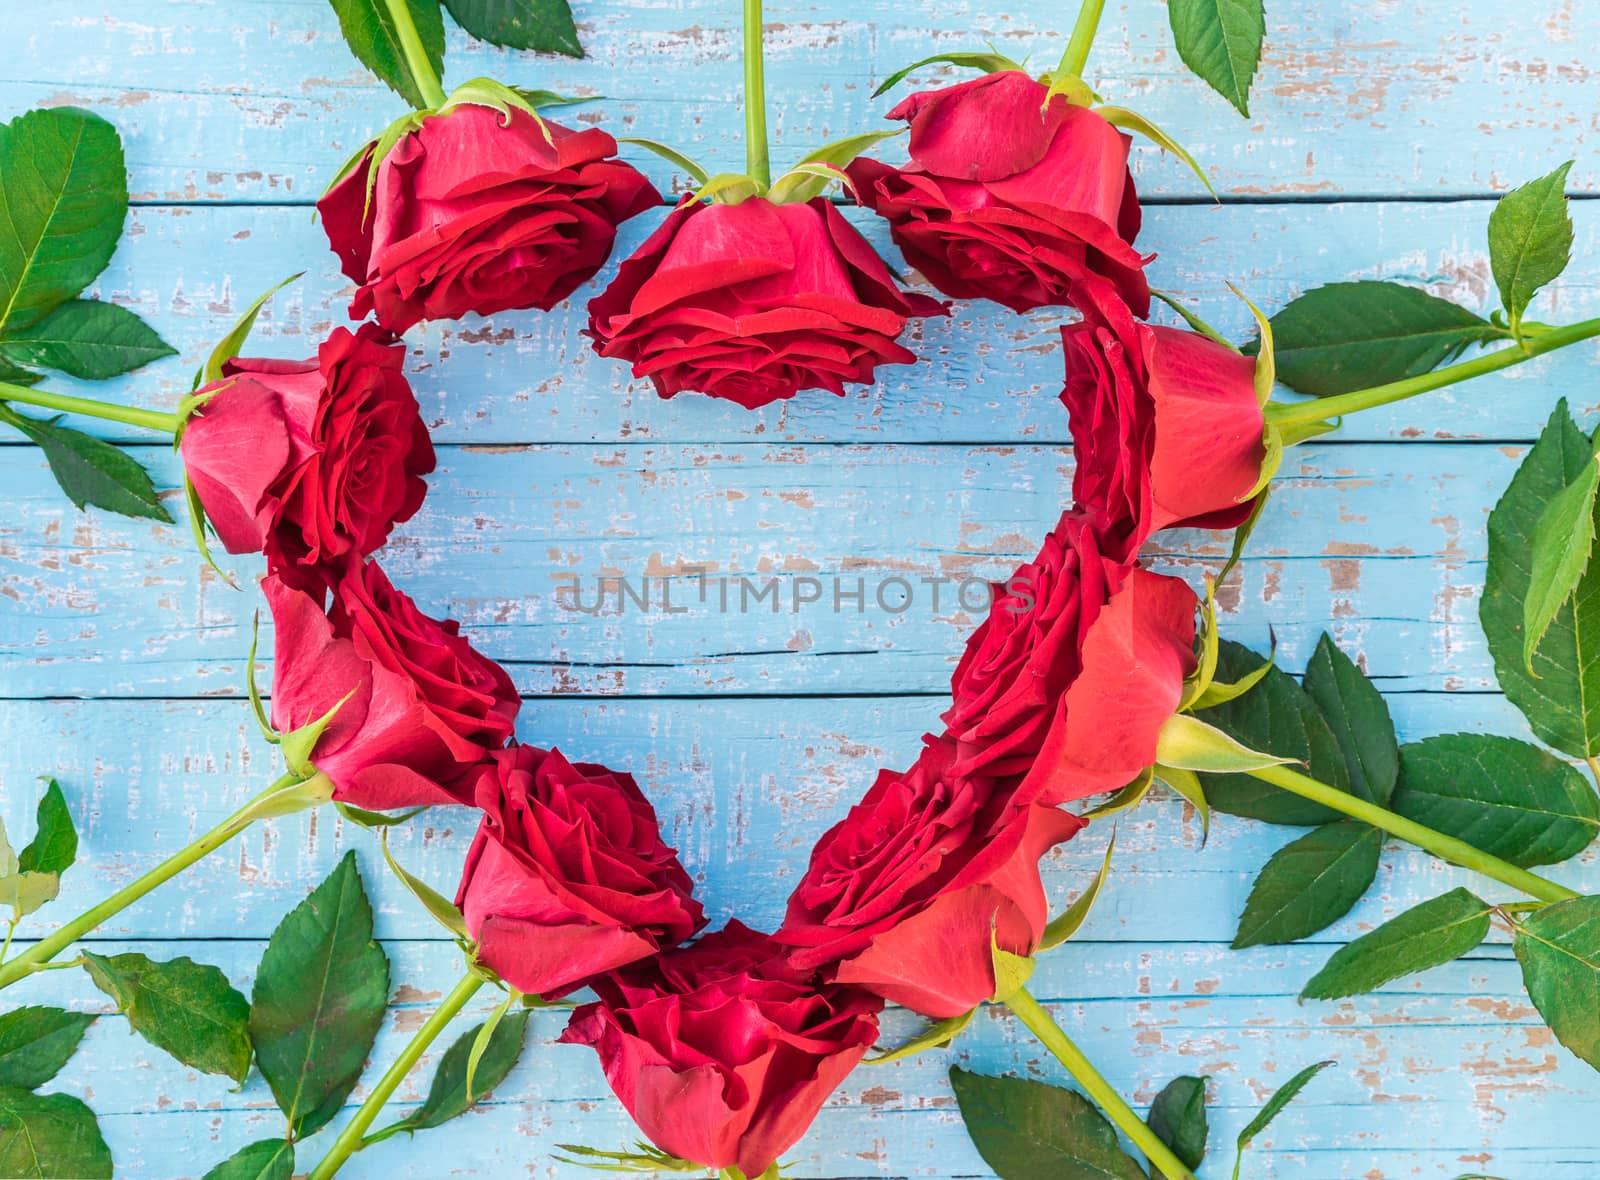 Flower heart shape of red roses on blue wooden background